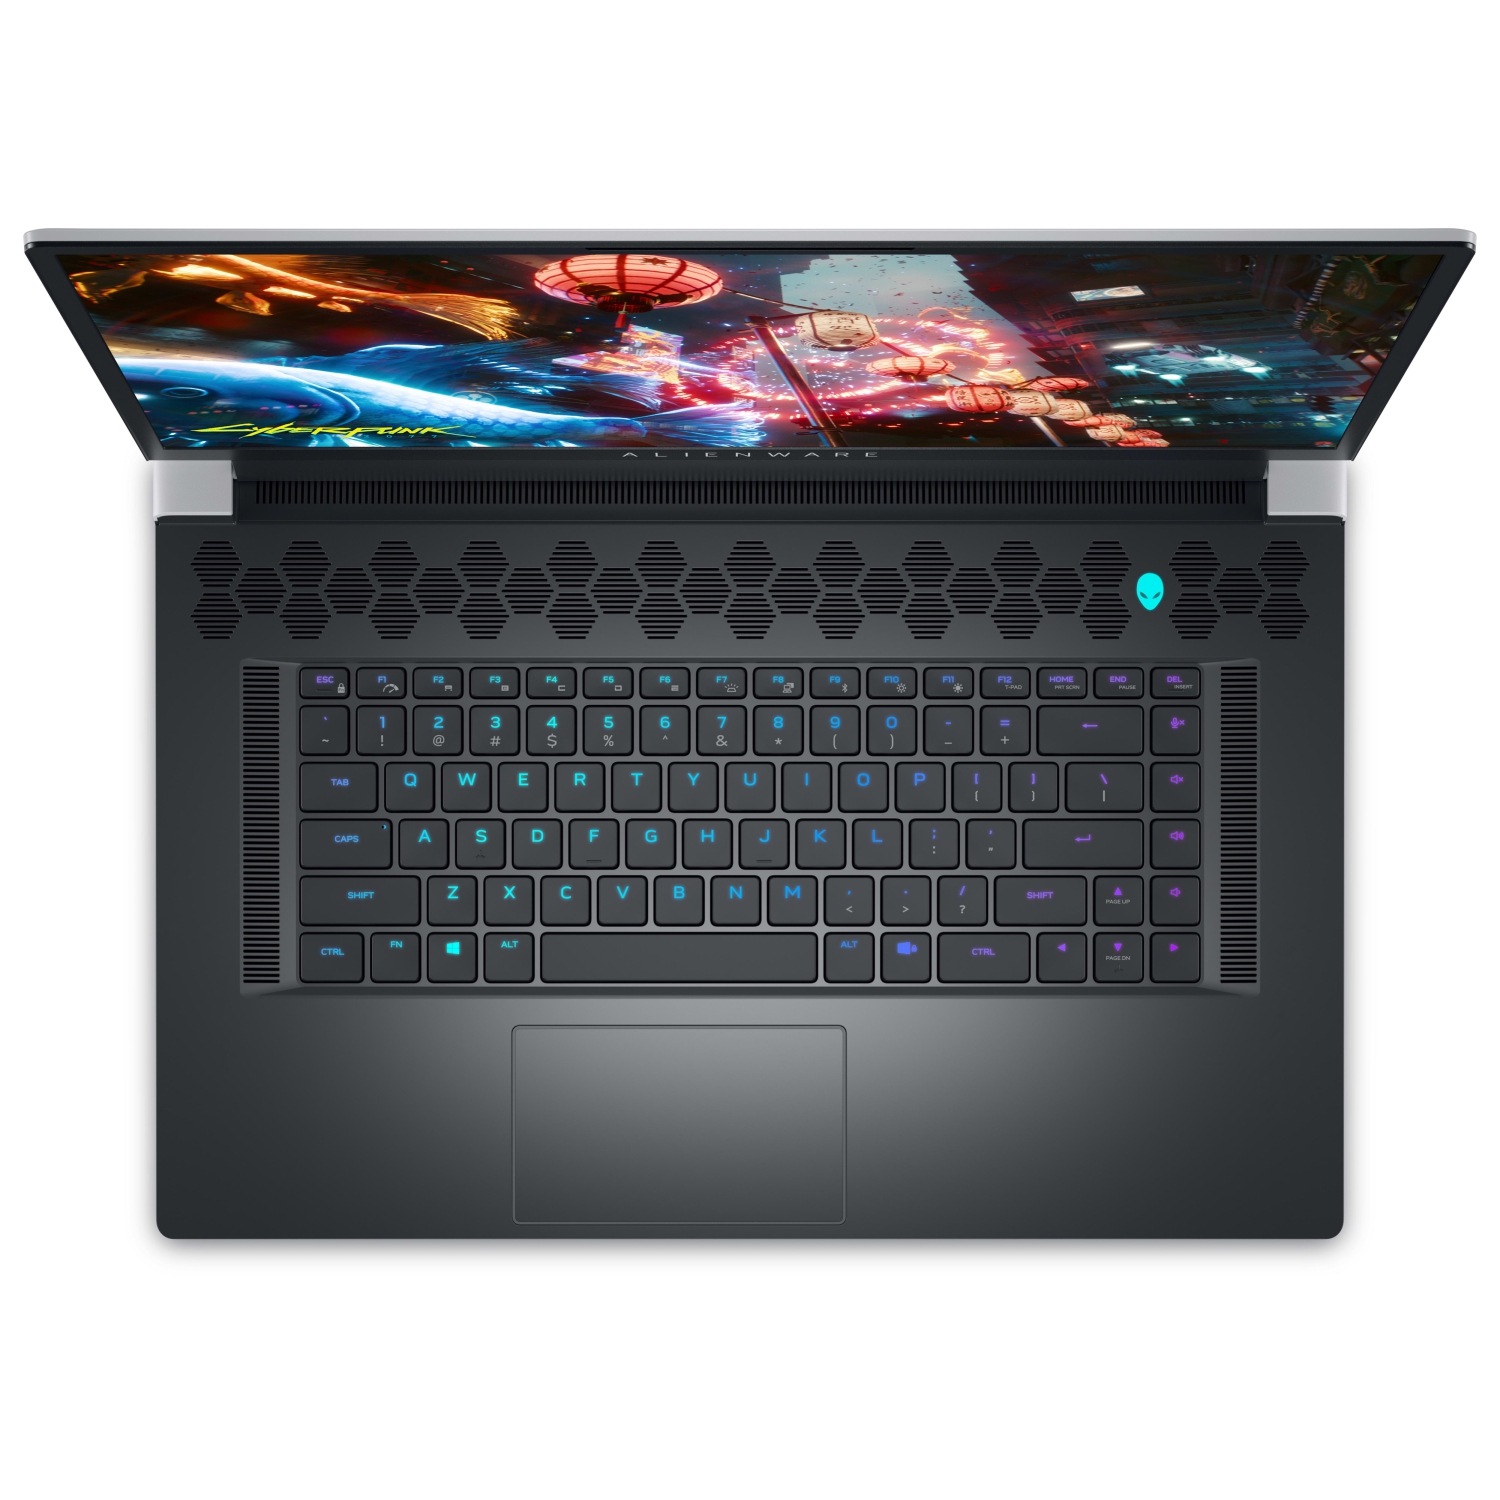 Refurbished (Excellent) – Dell Alienware X17 R2 Gaming Laptop (2022) | 17.3" FHD | Core i7 - 512GB SSD - 32GB RAM - 3080 Ti | 14 Cores @ 4.7 GHz - 12th Gen CPU - 12GB GDDR6X